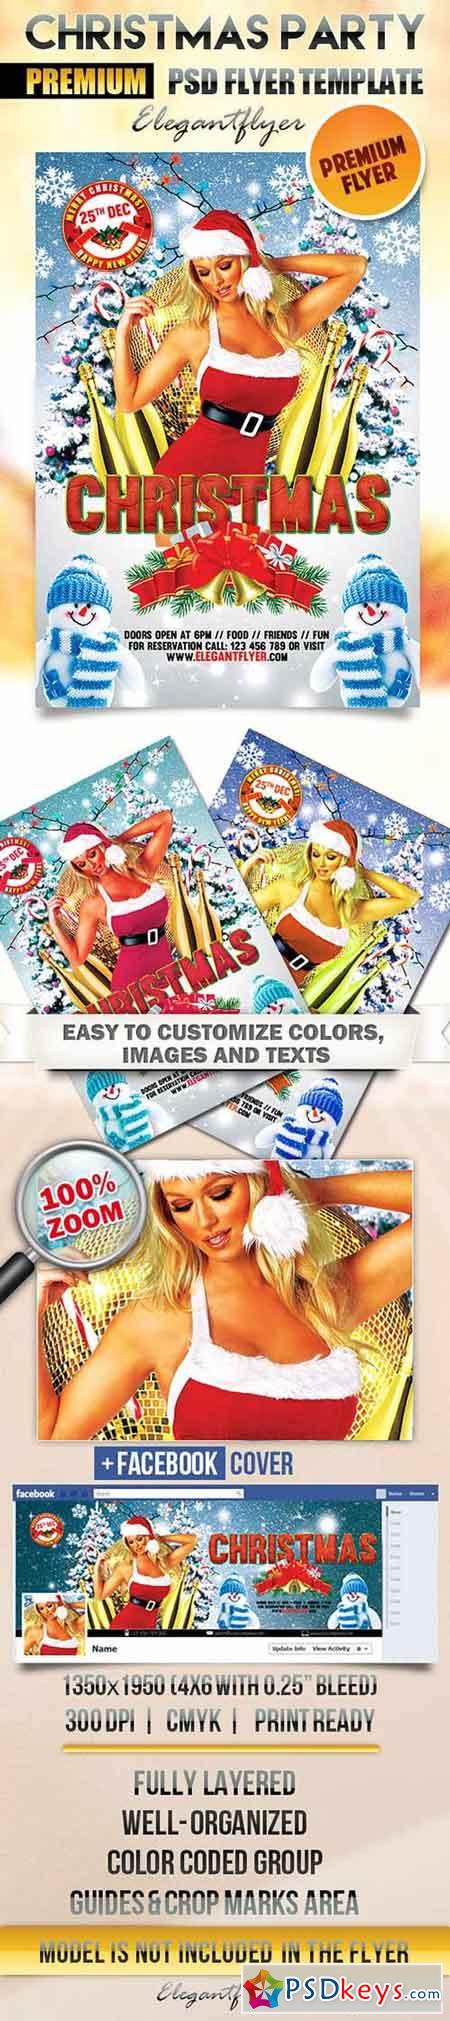 Christmas Party Flyer PSD Template + Facebook Cover 2